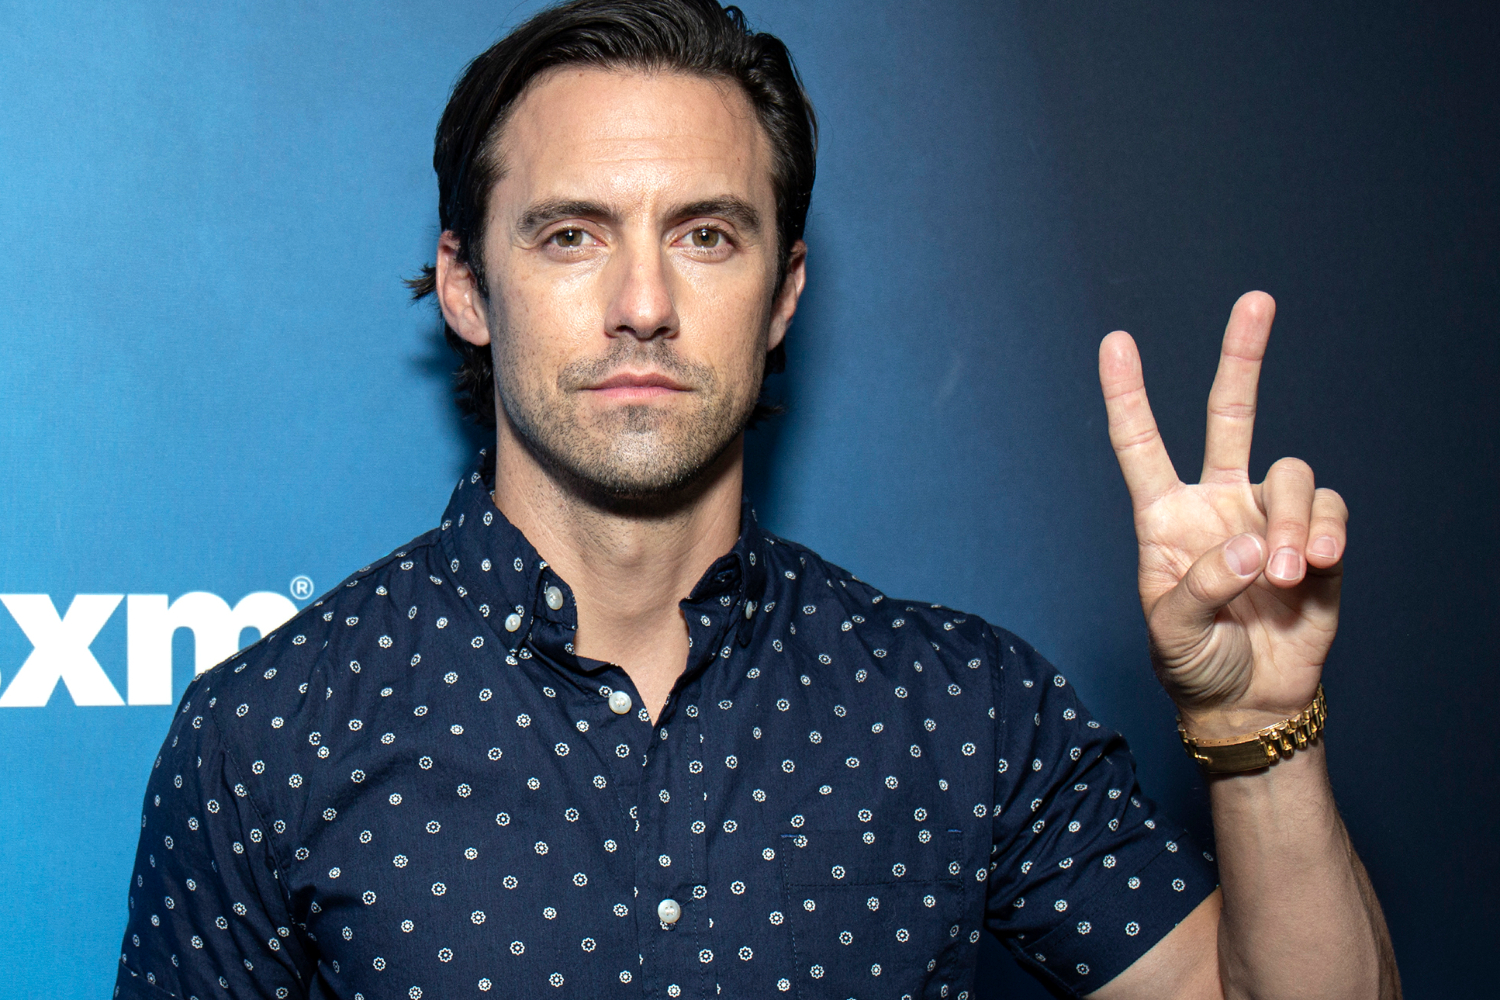 Milo Ventimiglia throws up a peace sign while posing against a blue backdrop